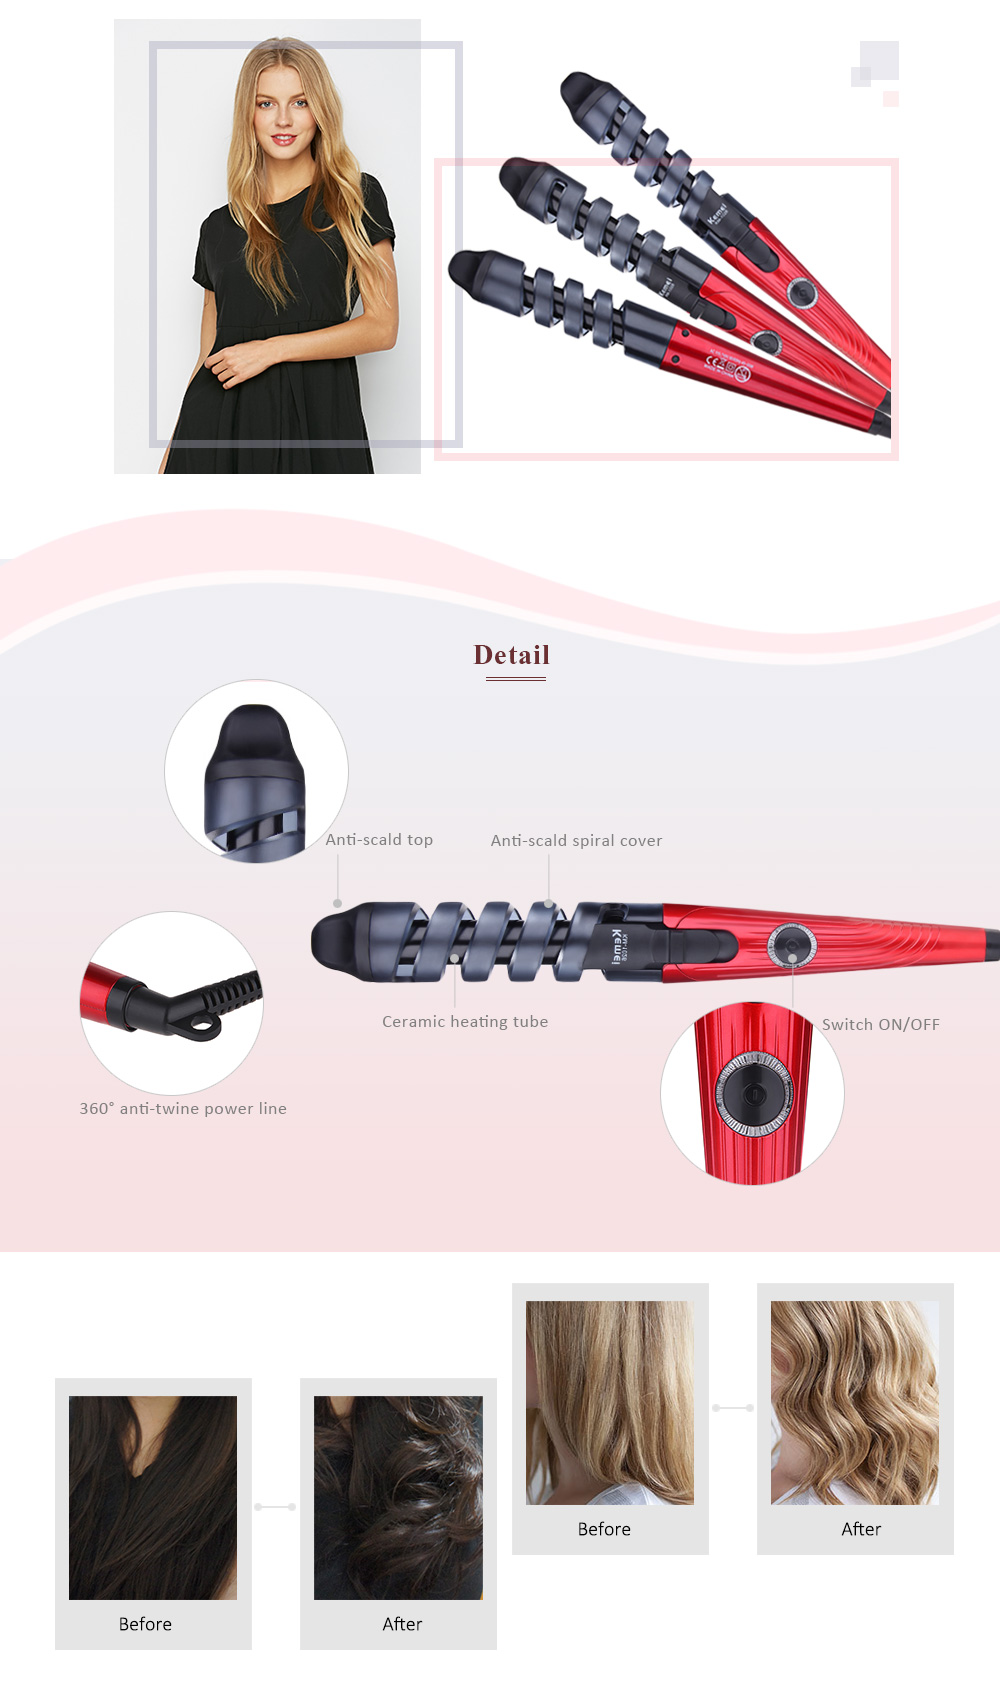 KM - 1026 Anti-scald Spiral Style Crimping Iron Hair Curler Perm Roller